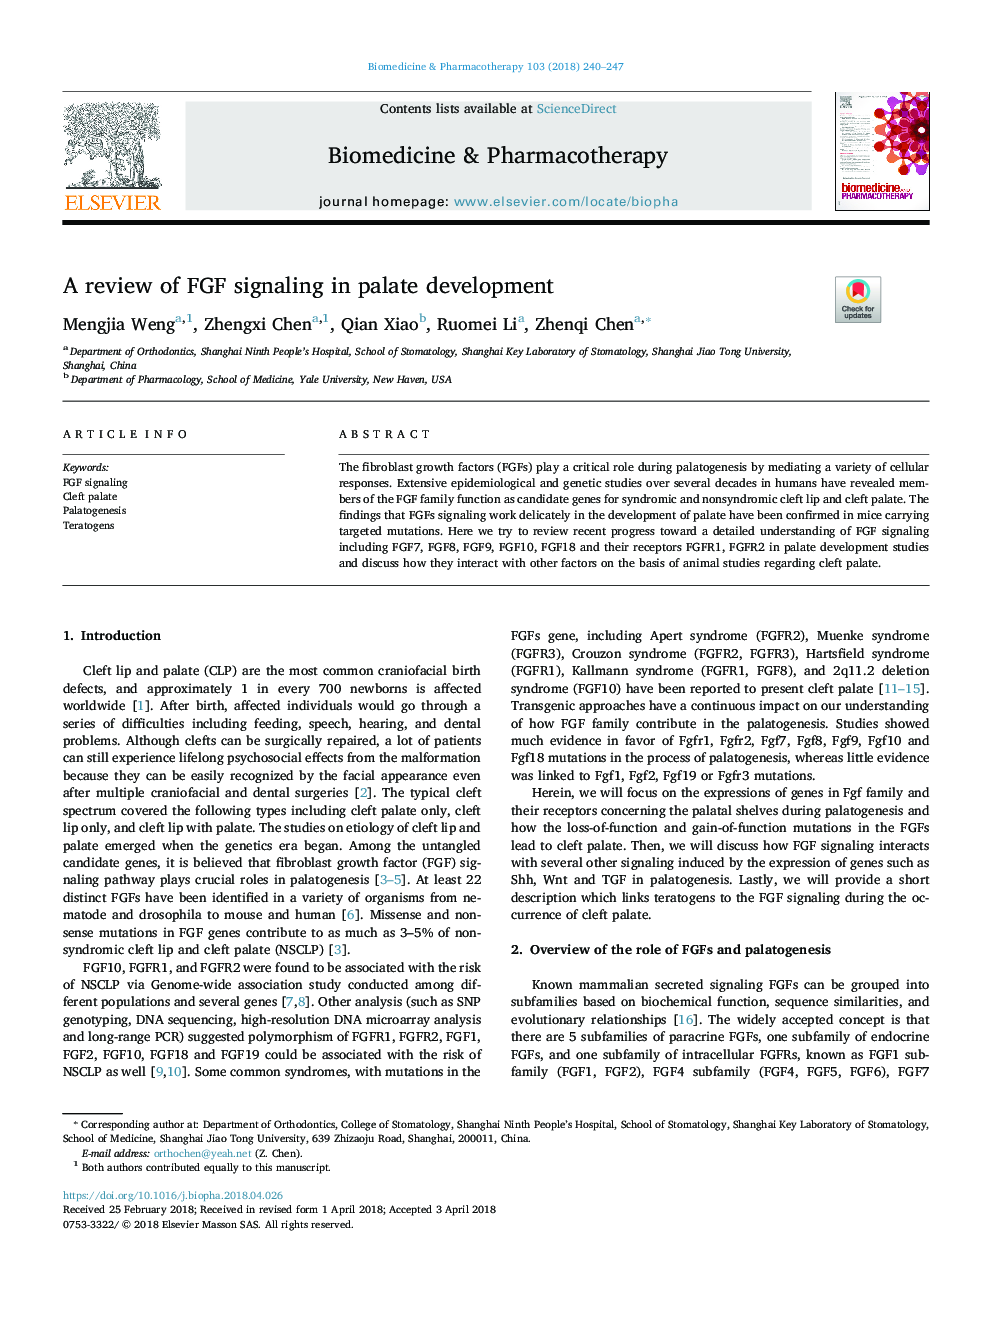 A review of FGF signaling in palate development